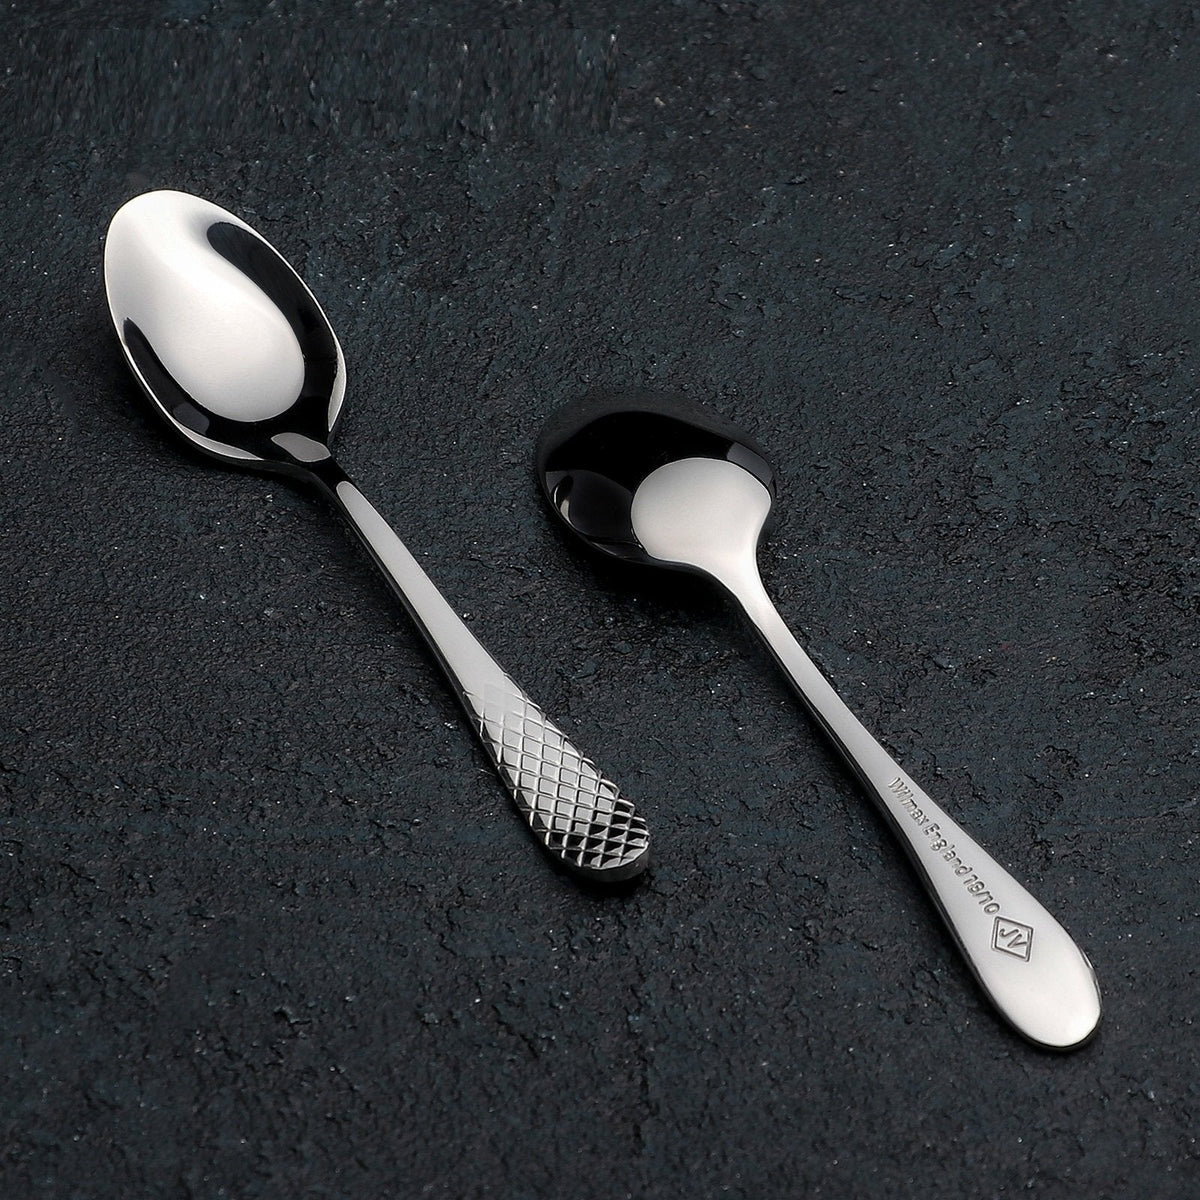 Wilmax Coffee Spoon 4.5" | 11.5 Cmset Of 6 In Gift Box SKU: WL-999204/6C